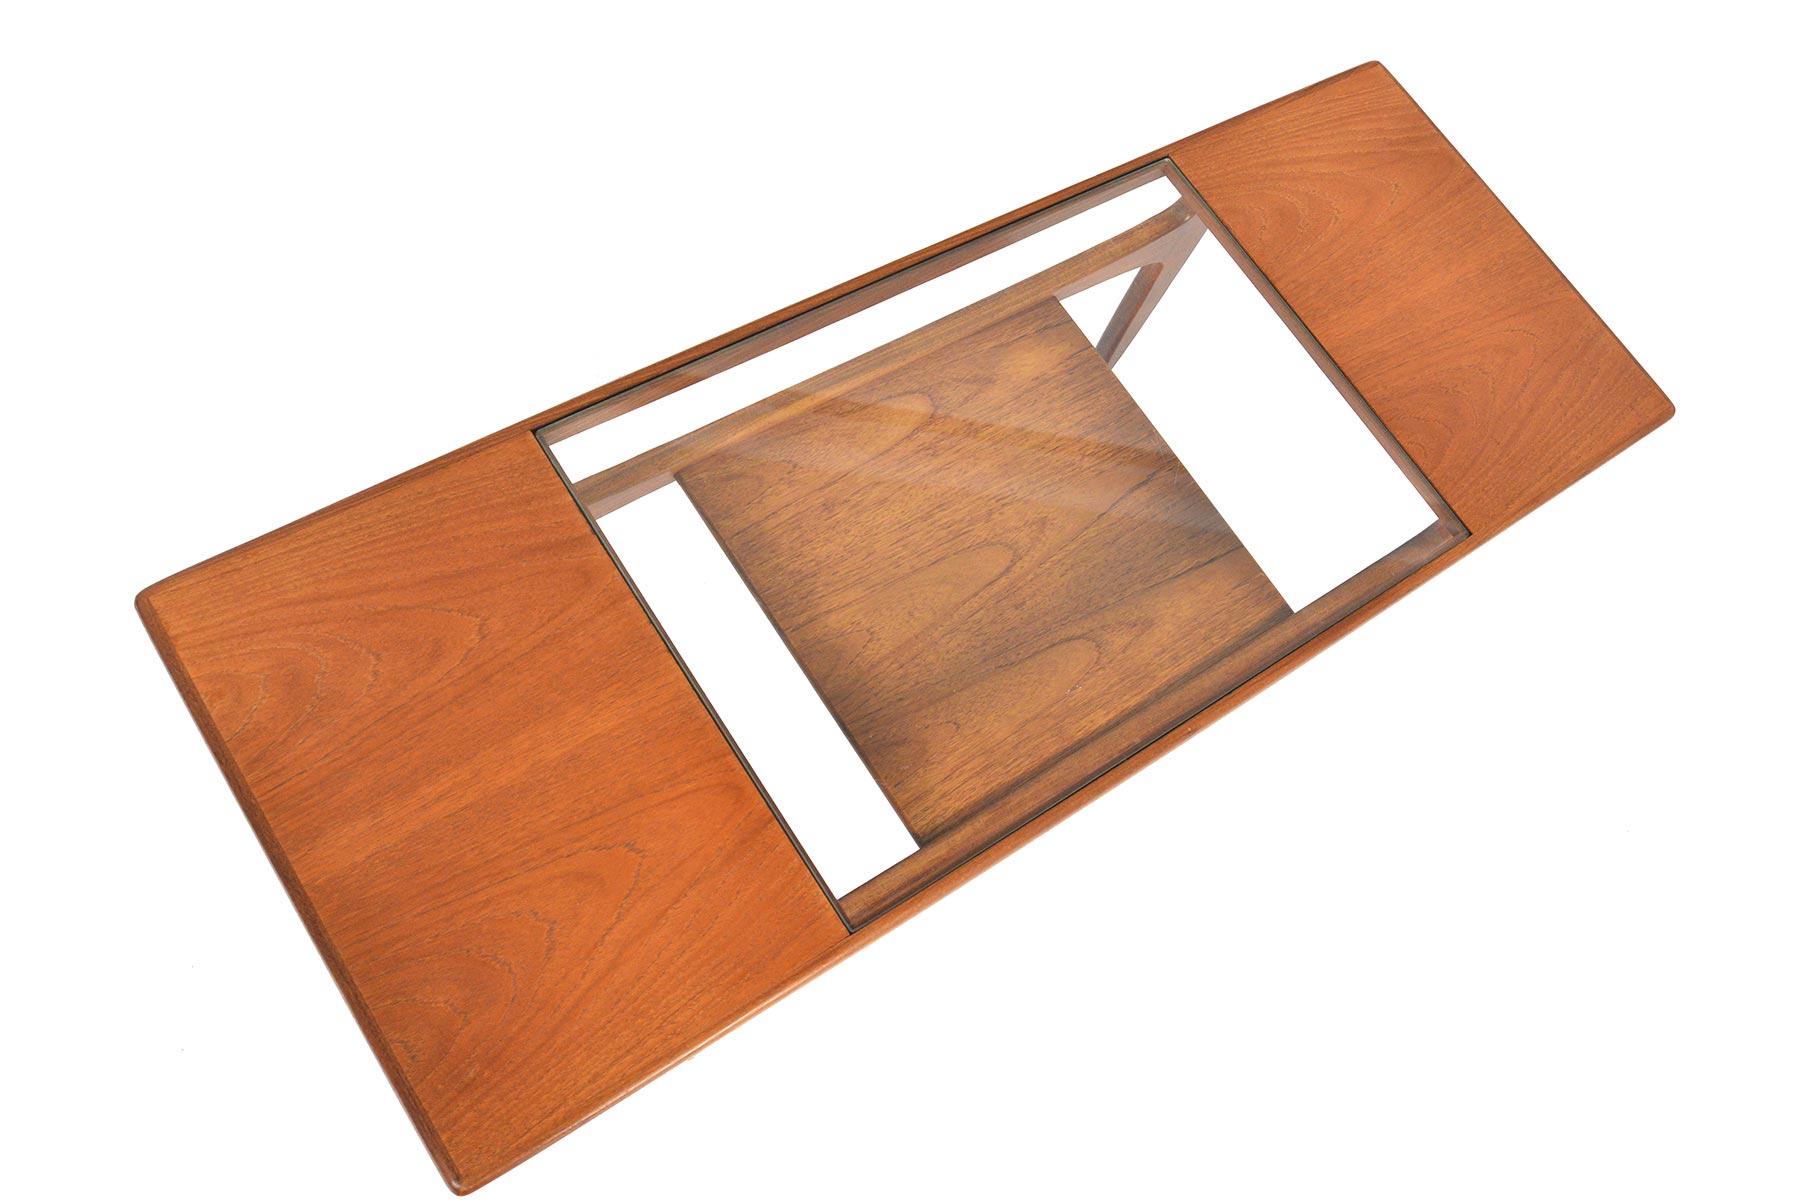 This English Mid-Century Modern teak and glass surfboard coffee table was designed by Victor Wilkins for G Plan’s Fresco range. The glass insert provides coaster free entertaining, and features a lower teak rack for books and magazines. In excellent